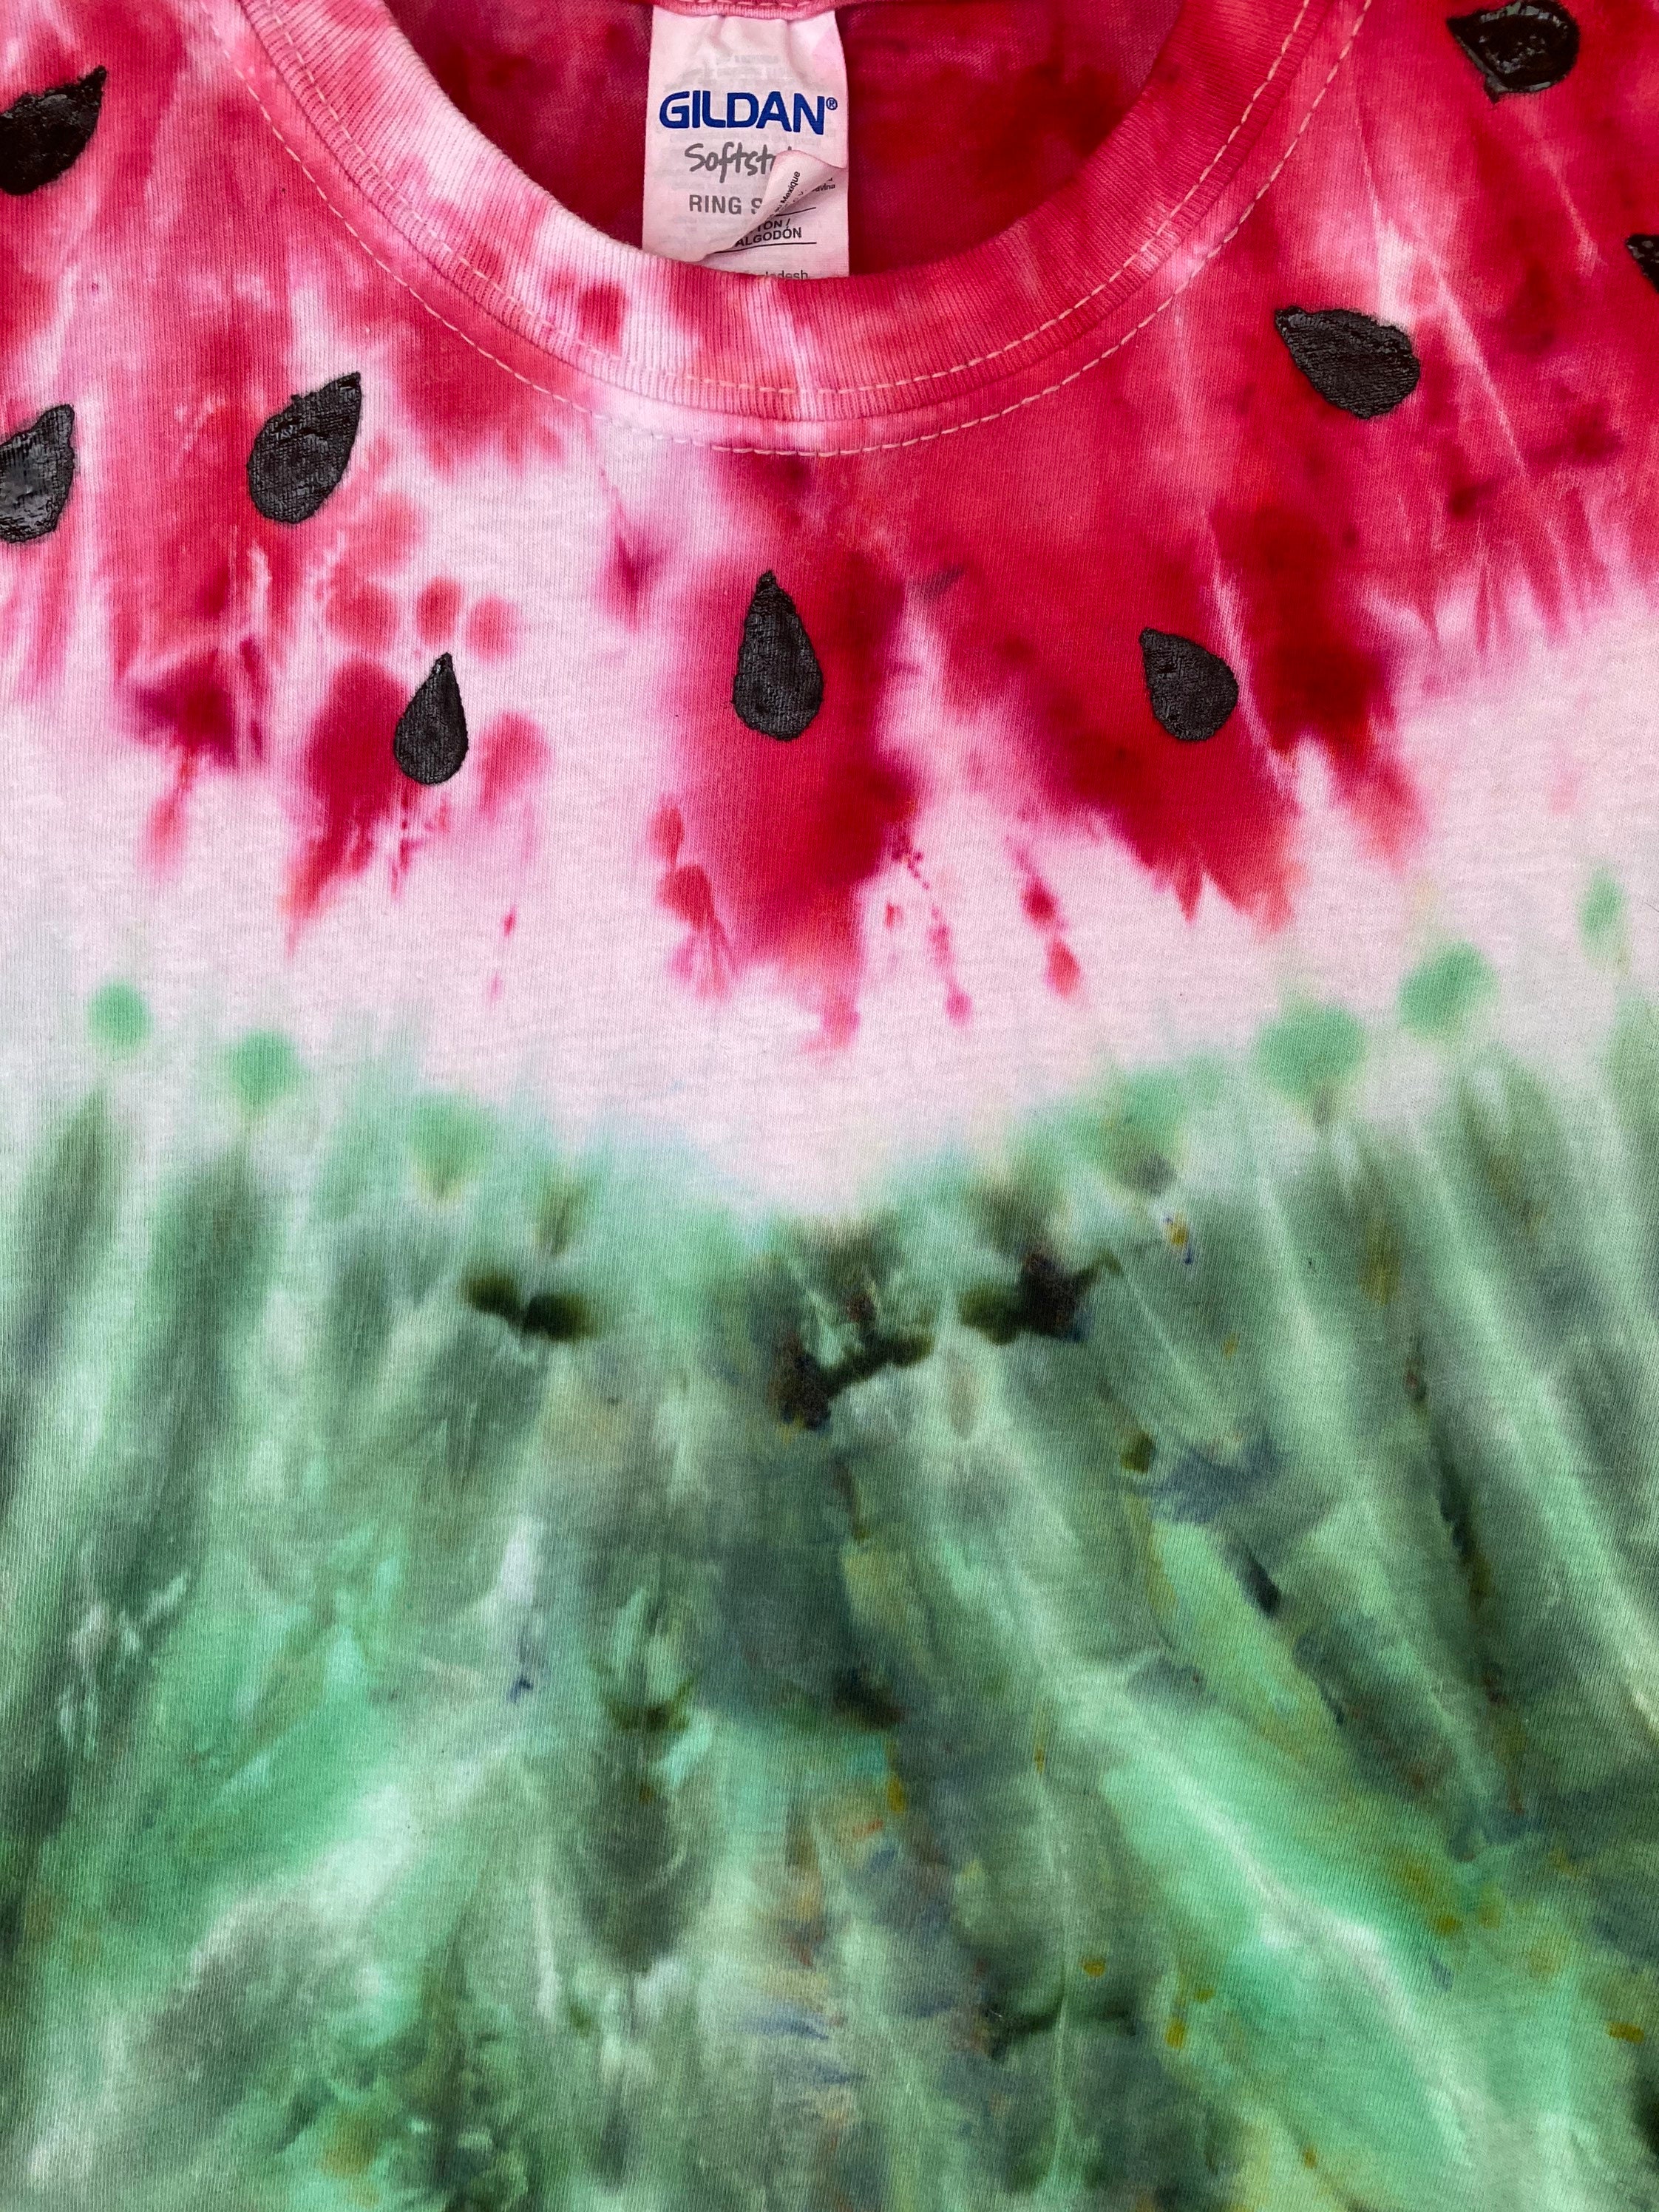 Tie dye tshirt hand-dyed watermelon kids T-shirt ages 5-6 & | Etsy